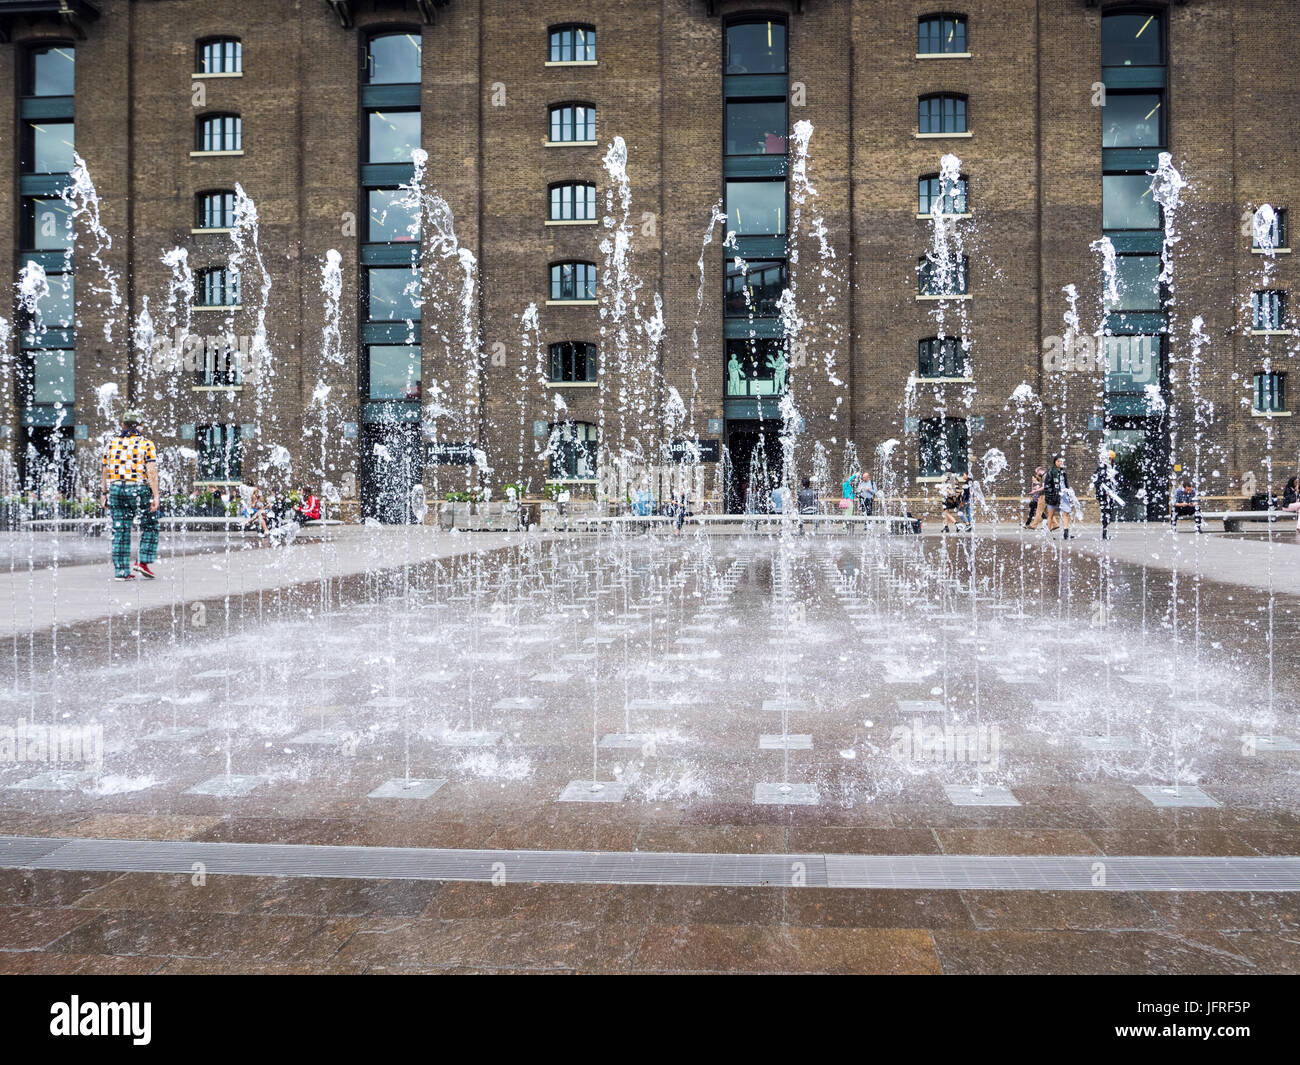 Fountains in front of the UAL (University of the Arts London) Central St Martins Campus at Granary Square near King's Cross, central London UK Stock Photo